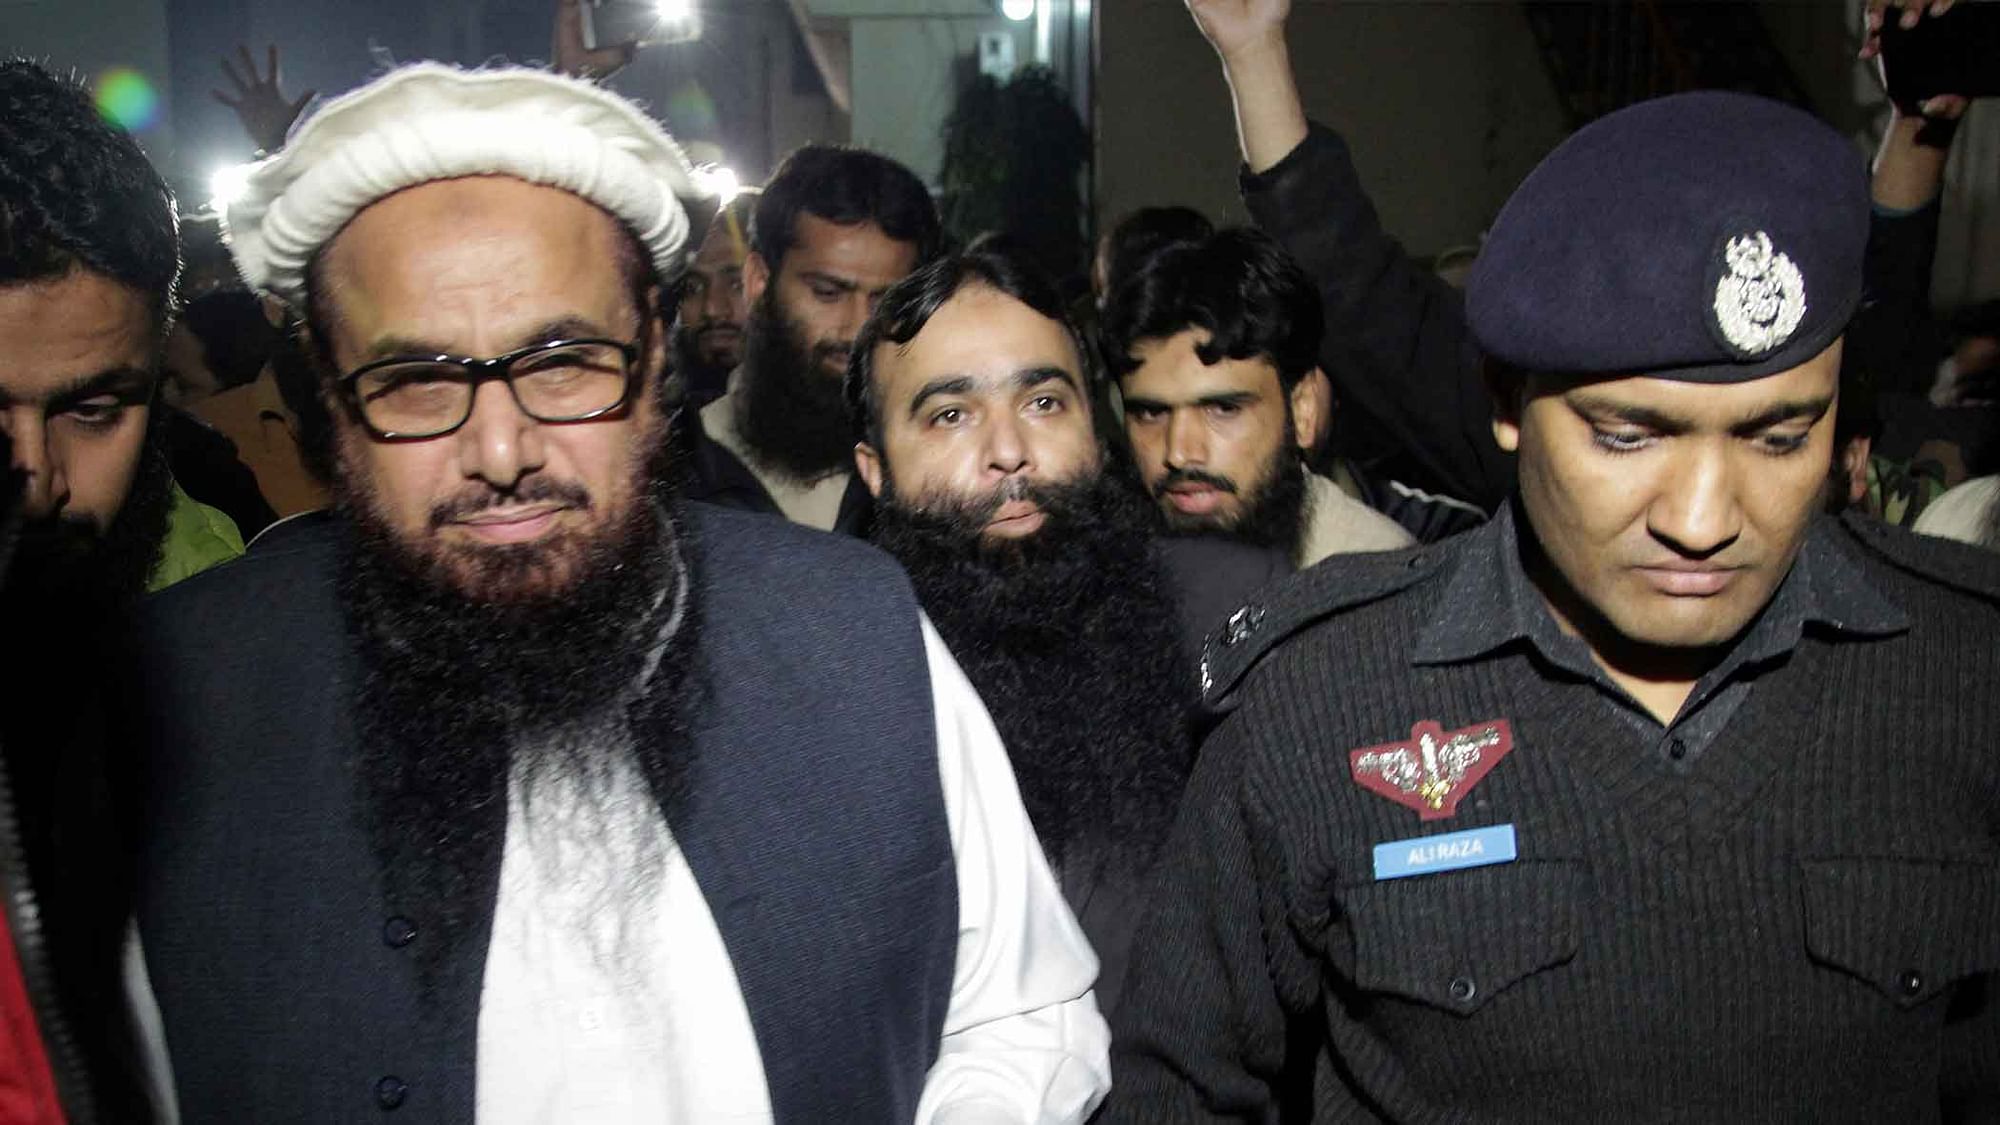 Hafeez Saeed talks to the press after the six-month house arrest order. (Photo: AP)